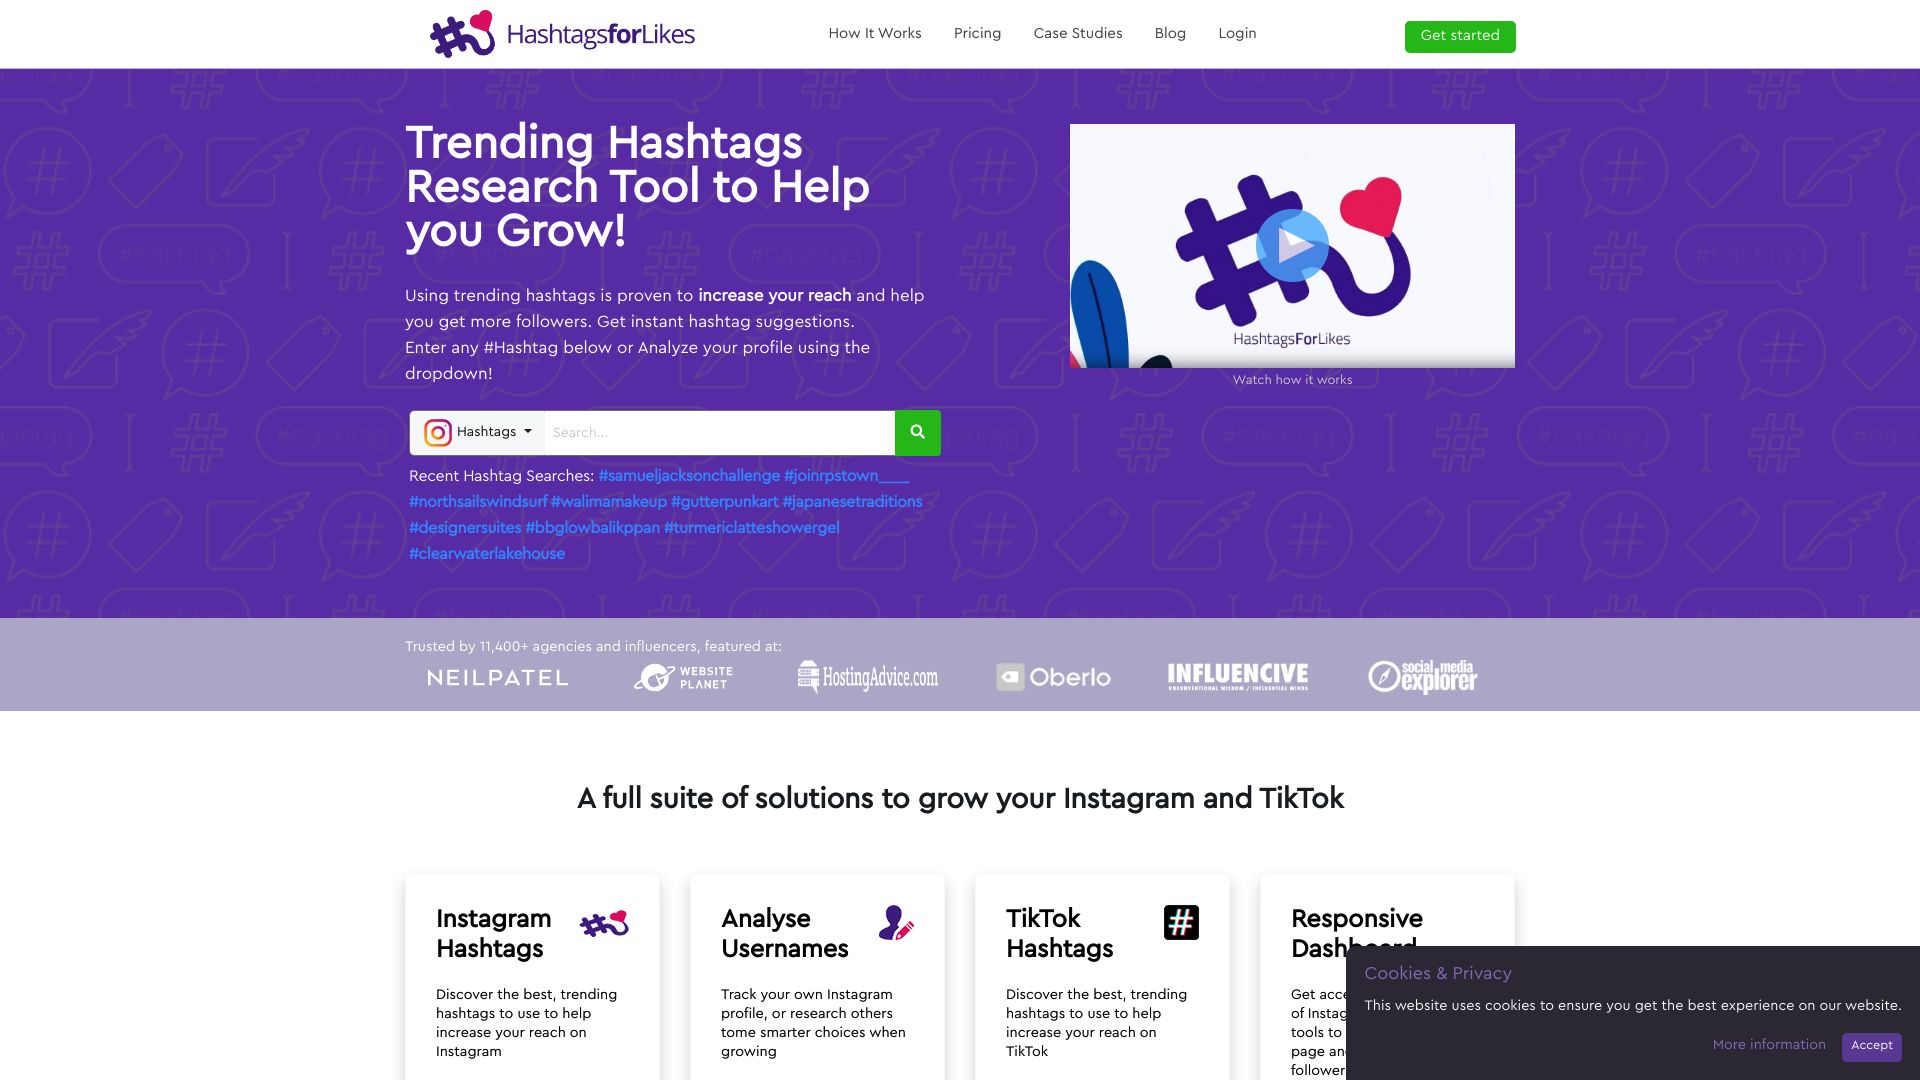 Trending Hashtags Research Tool to Help you Grow!